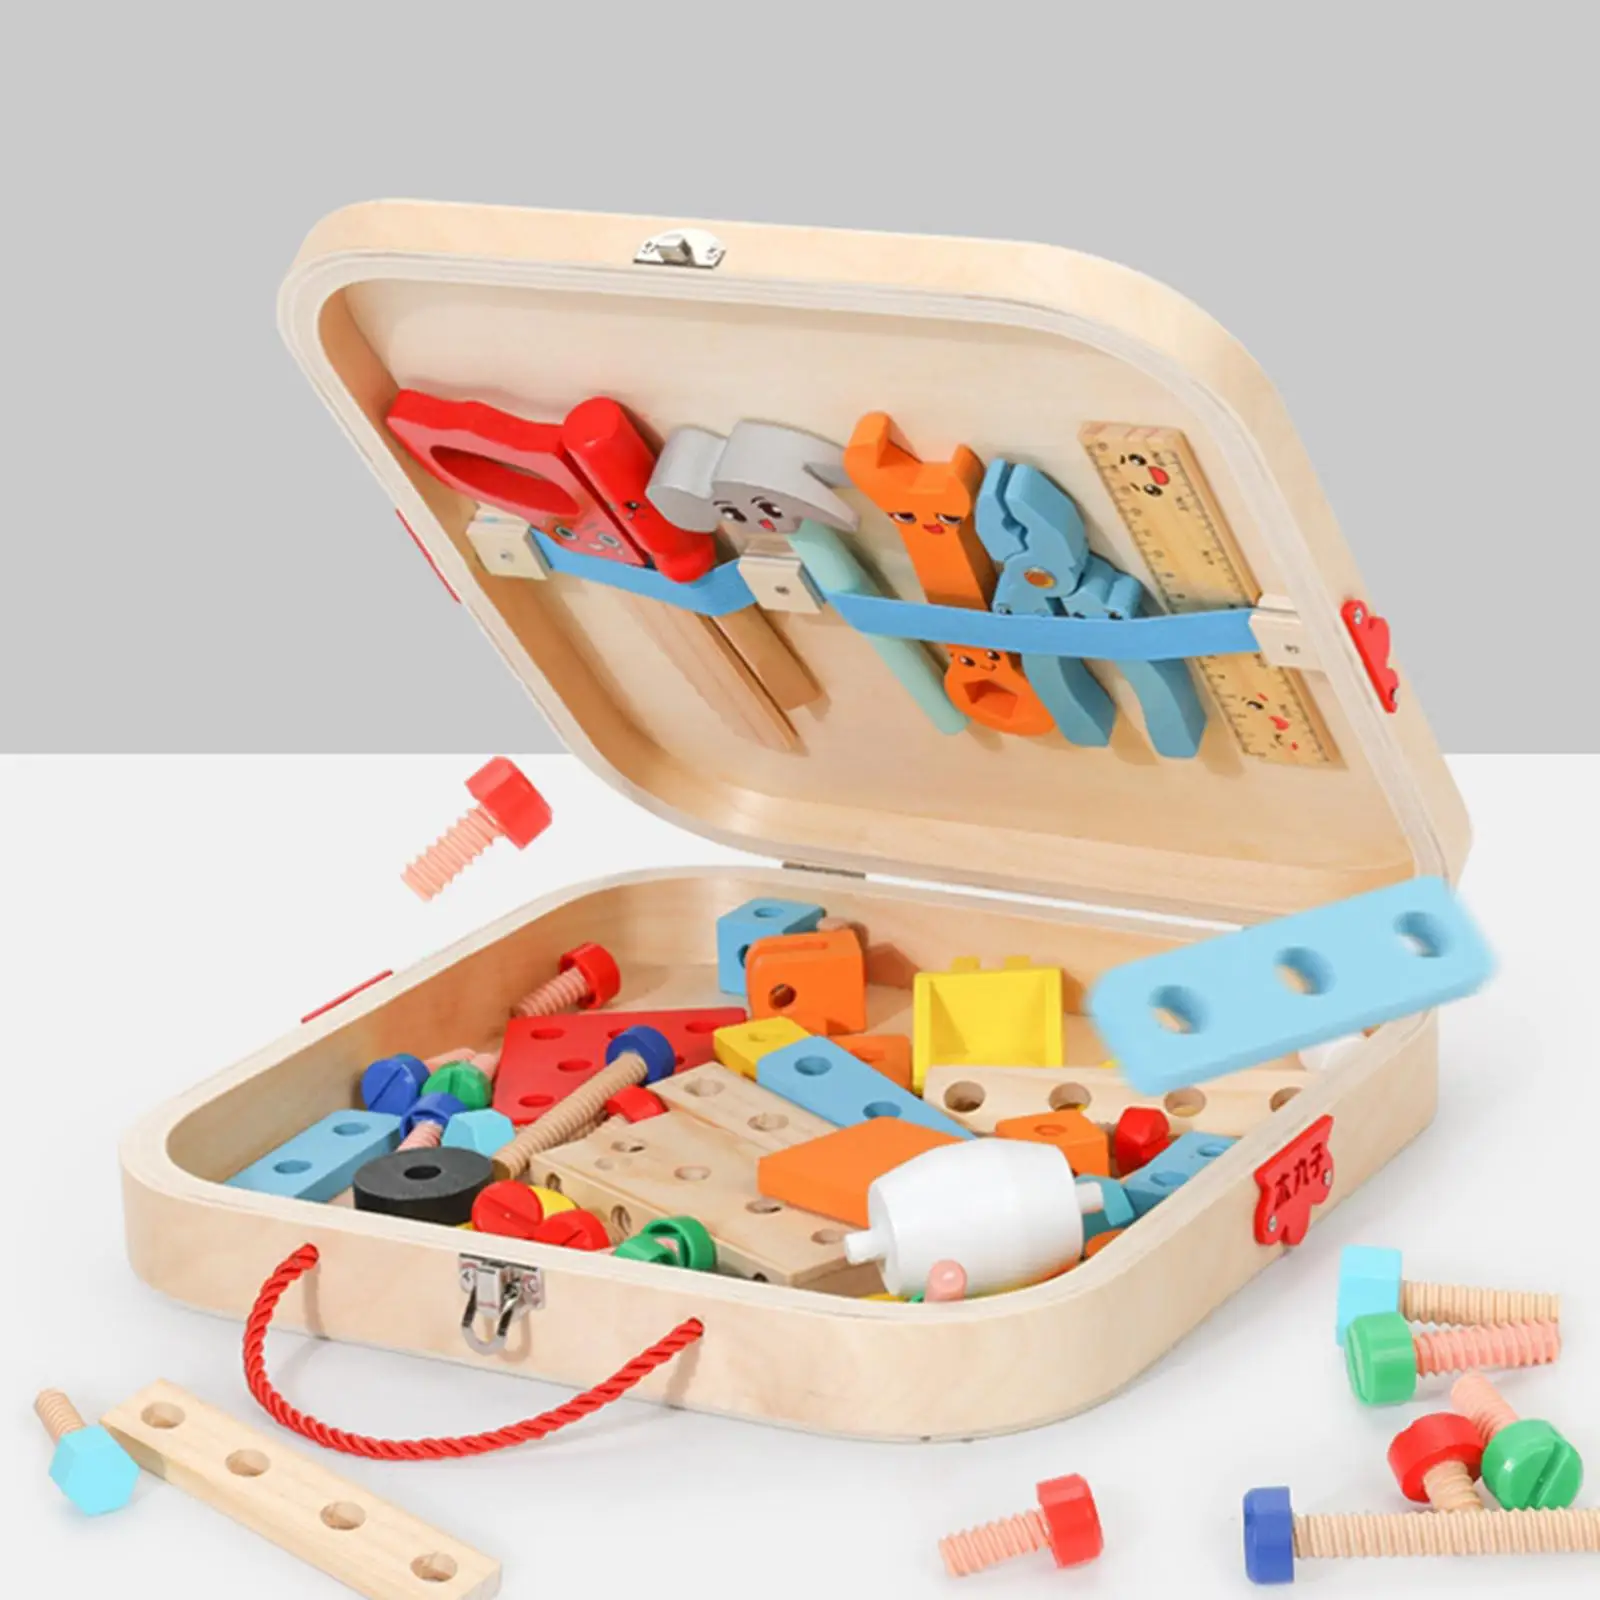 Kids Tool Set Construction Toy Wooden Toddlers Tools Set for Bedroom Birthday Gift Home DIY 2 3 4 5 6 Year Old Boys and Girls